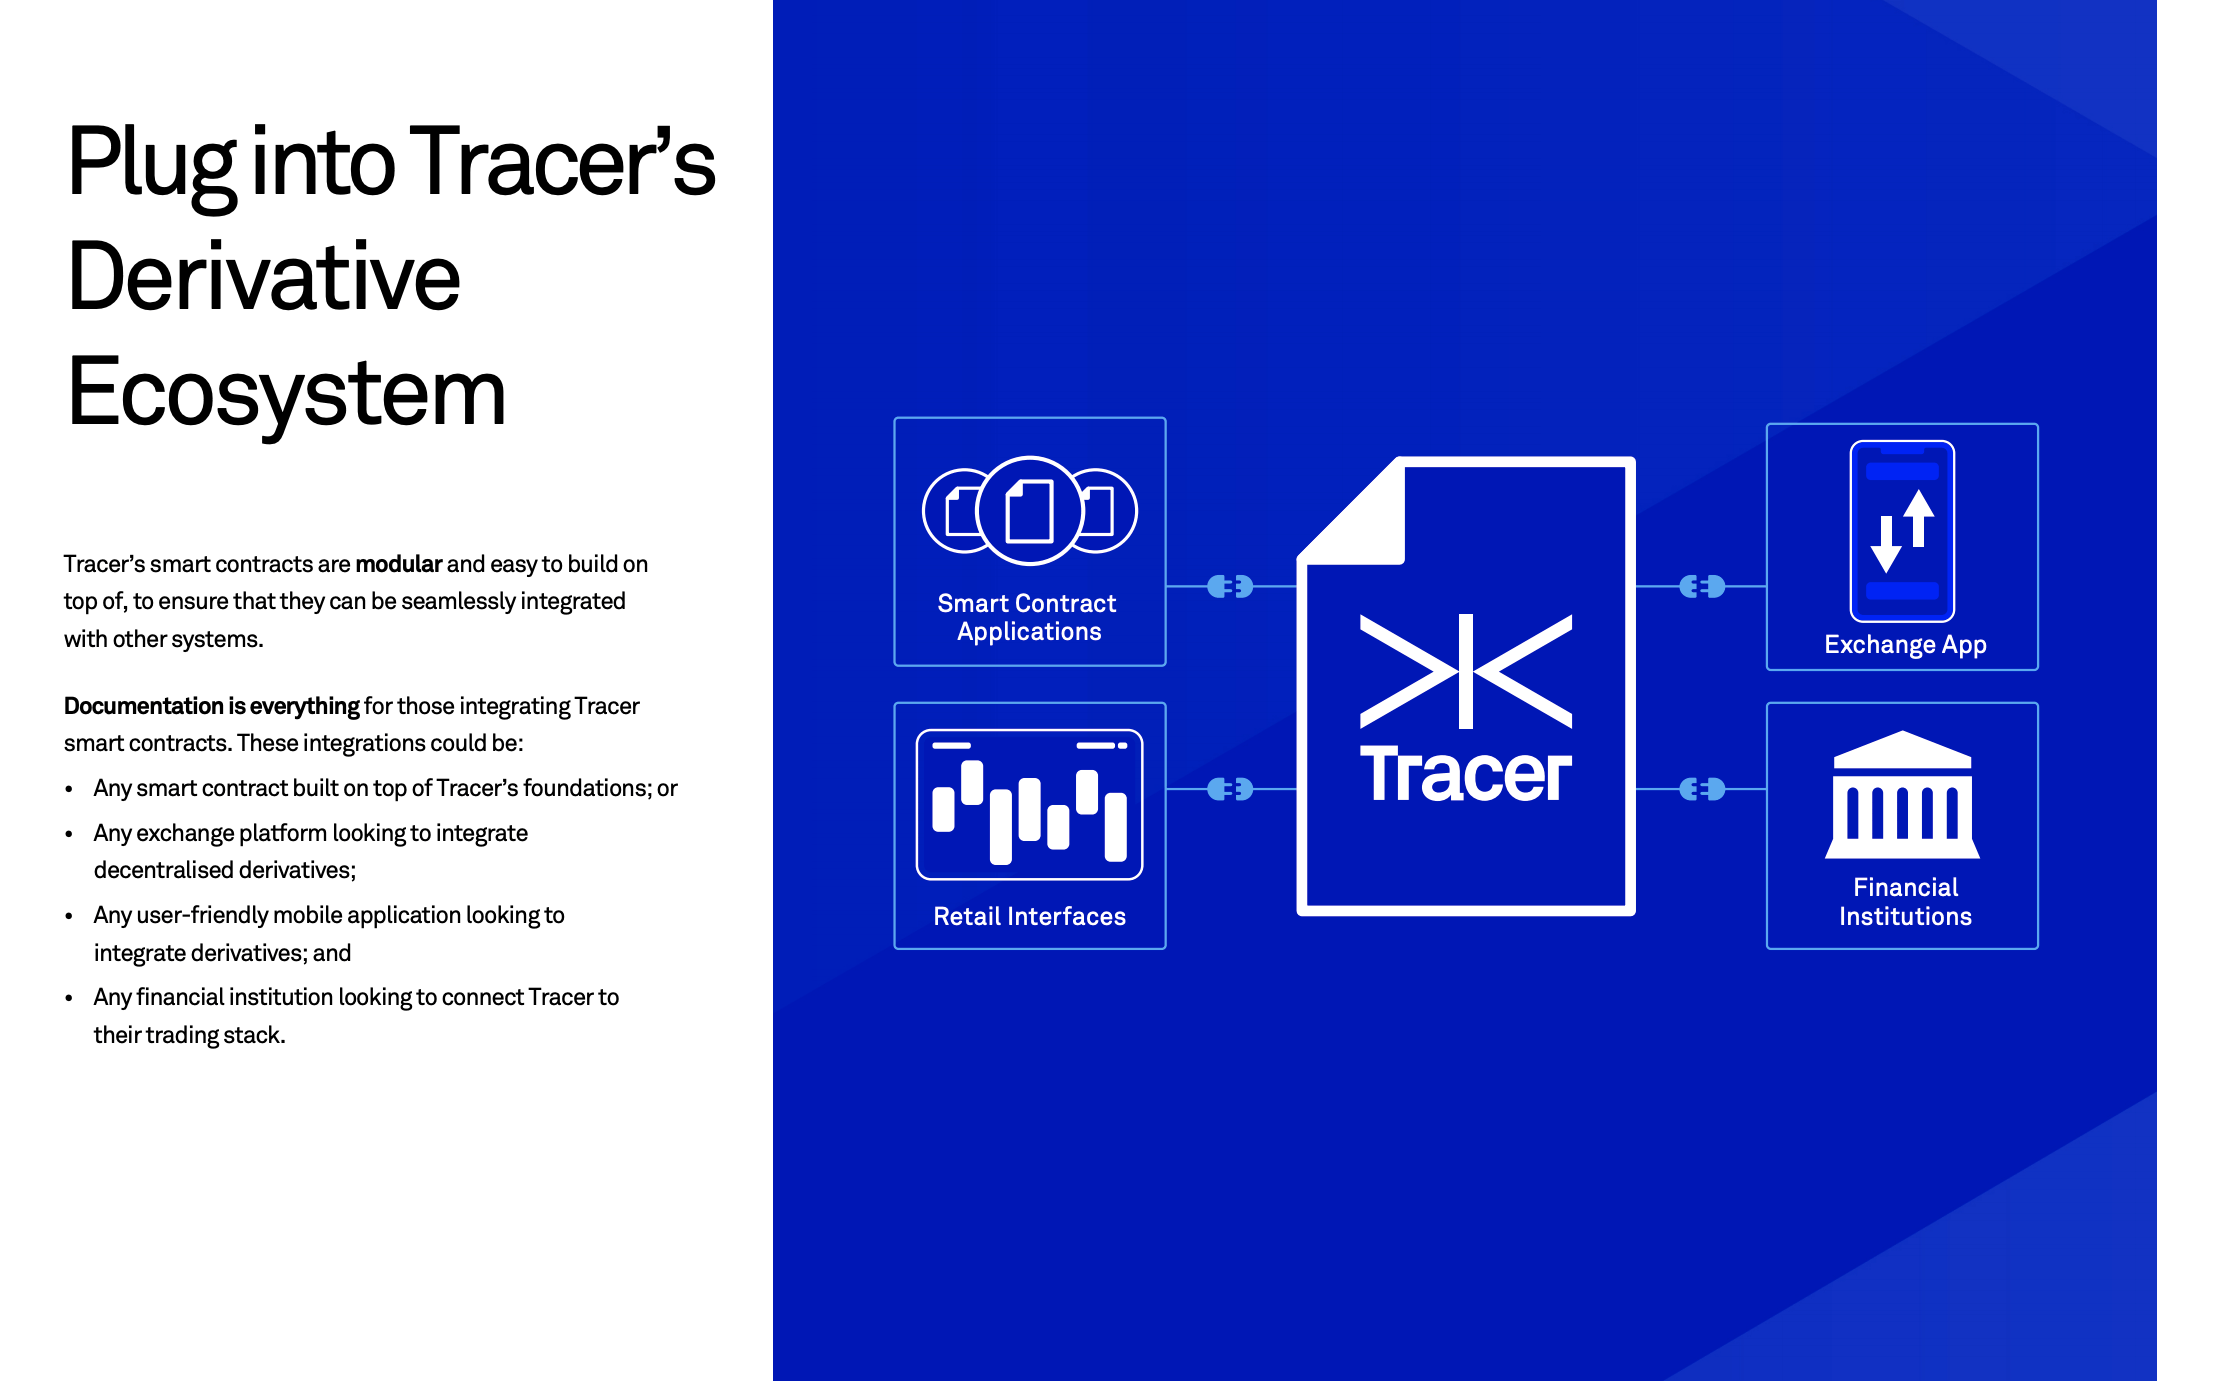 Tracer Ecosystem